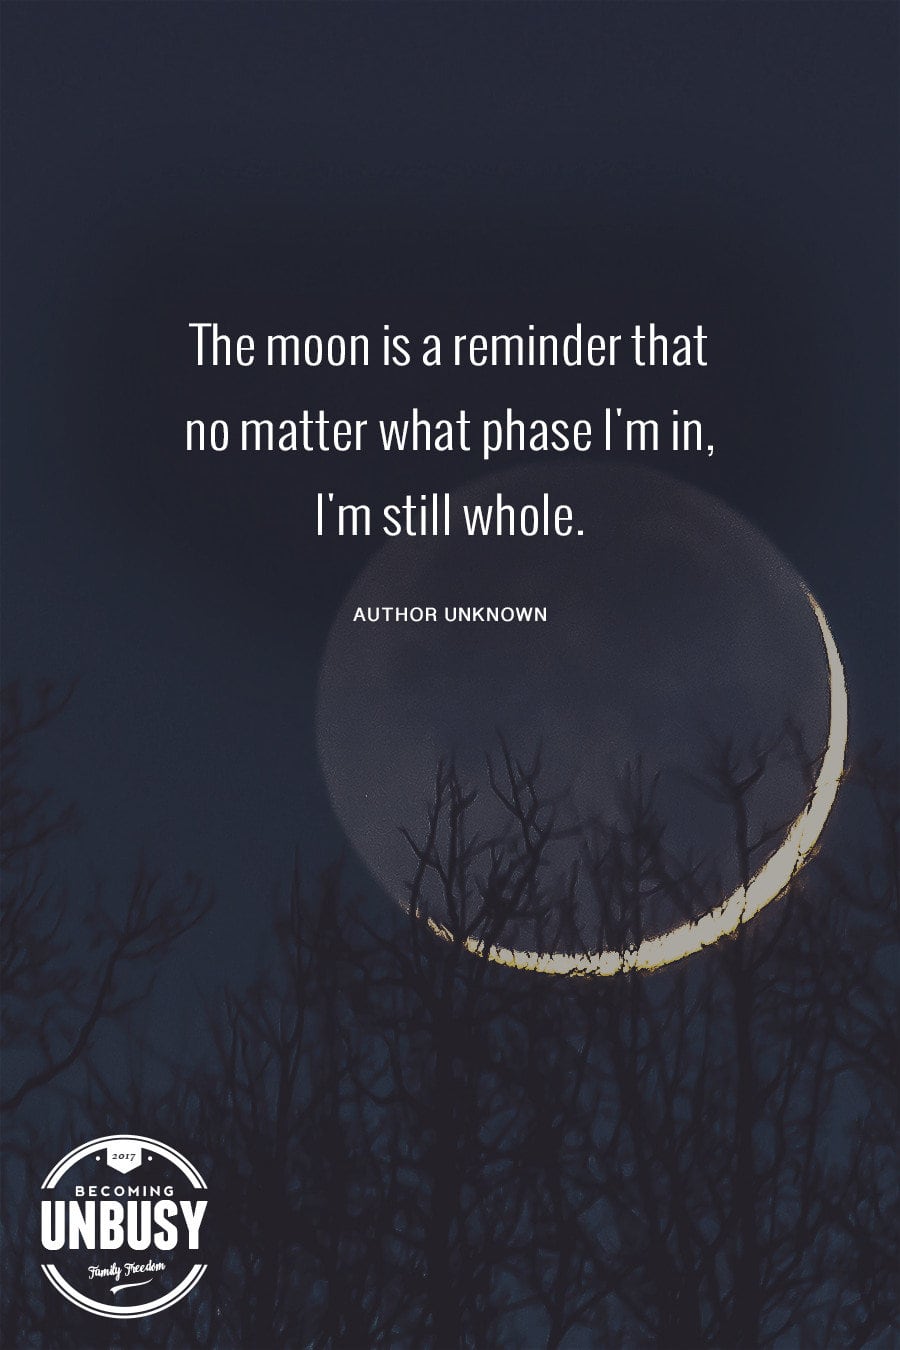 The following winter self-care quote over a photo of a crescent moon, "The moon is a reminder that no matter what phase I'm in, I'm still whole."